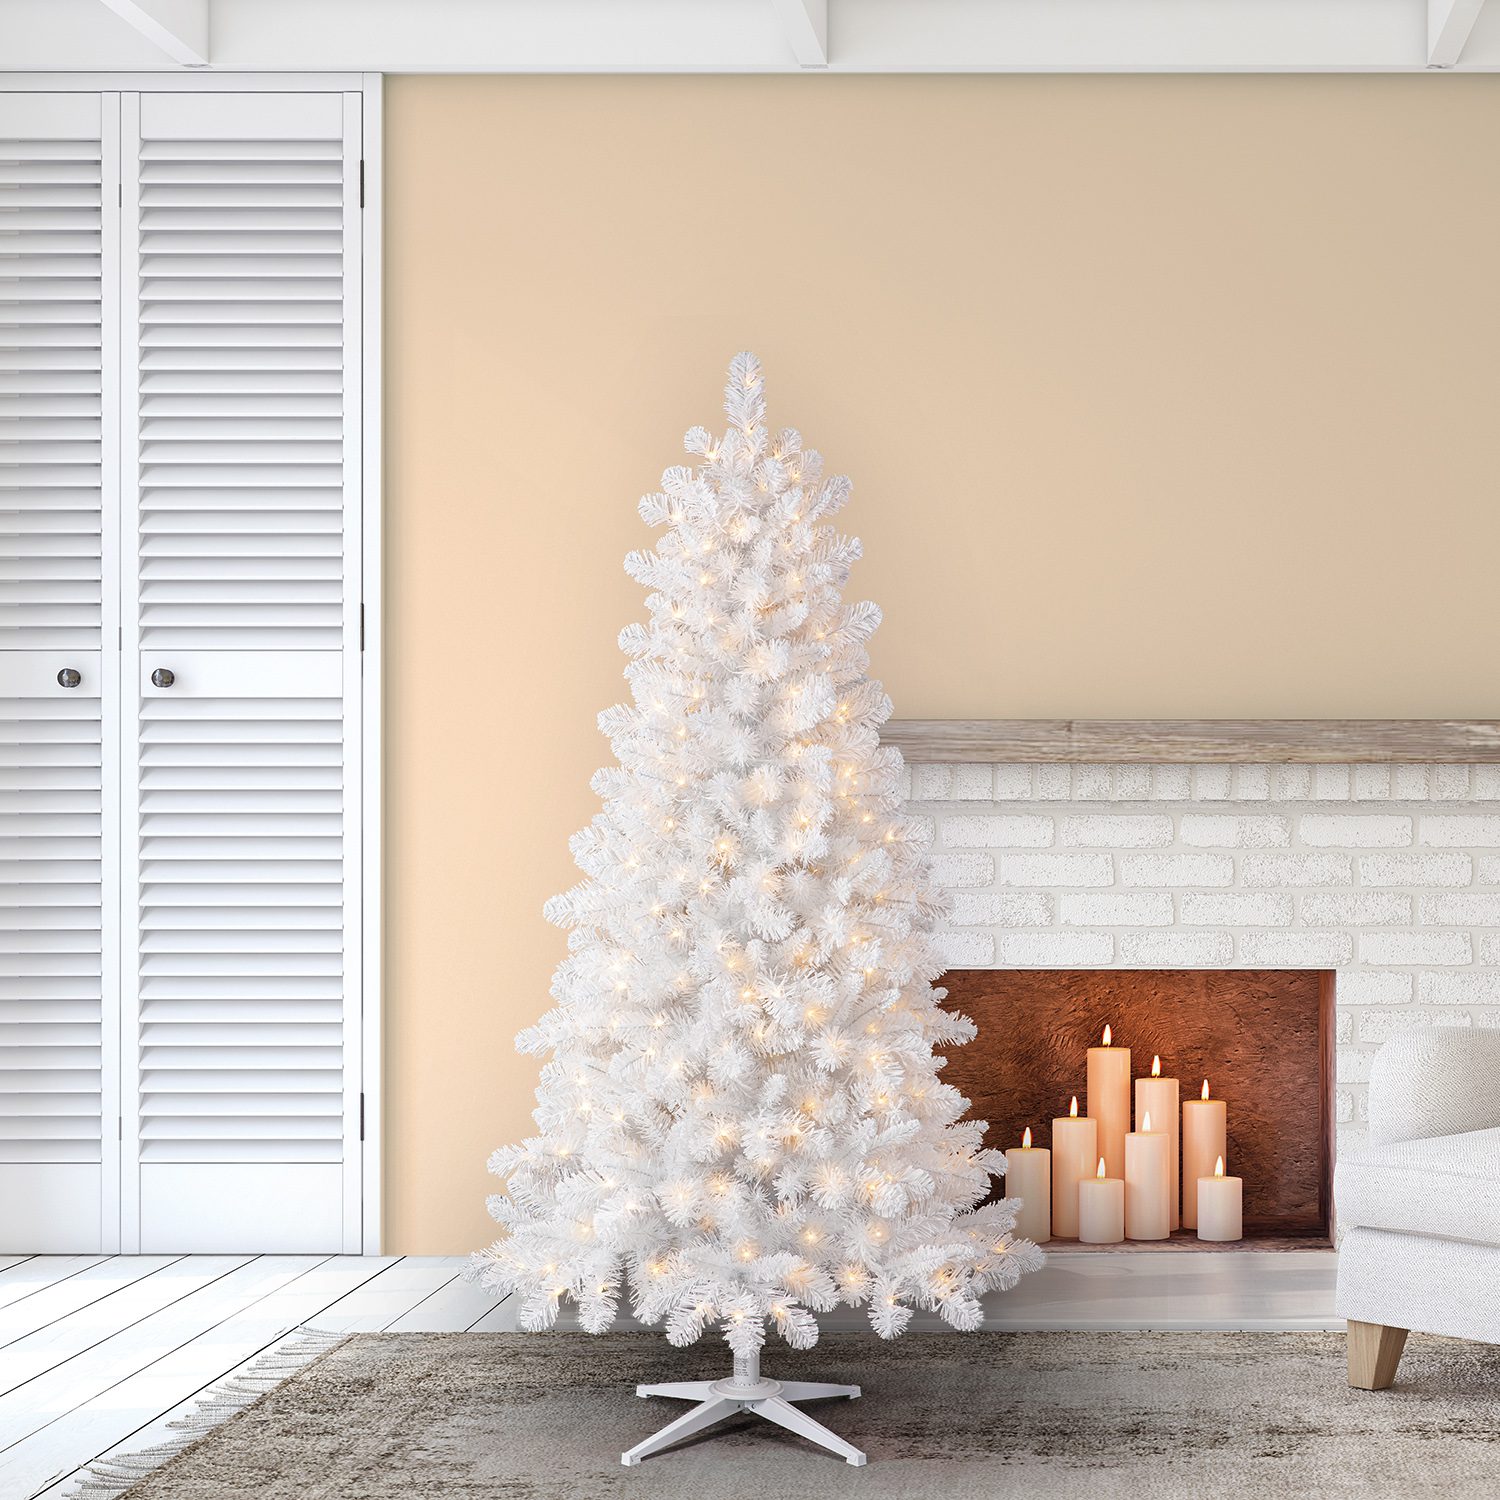 Artificial tree presented in living room